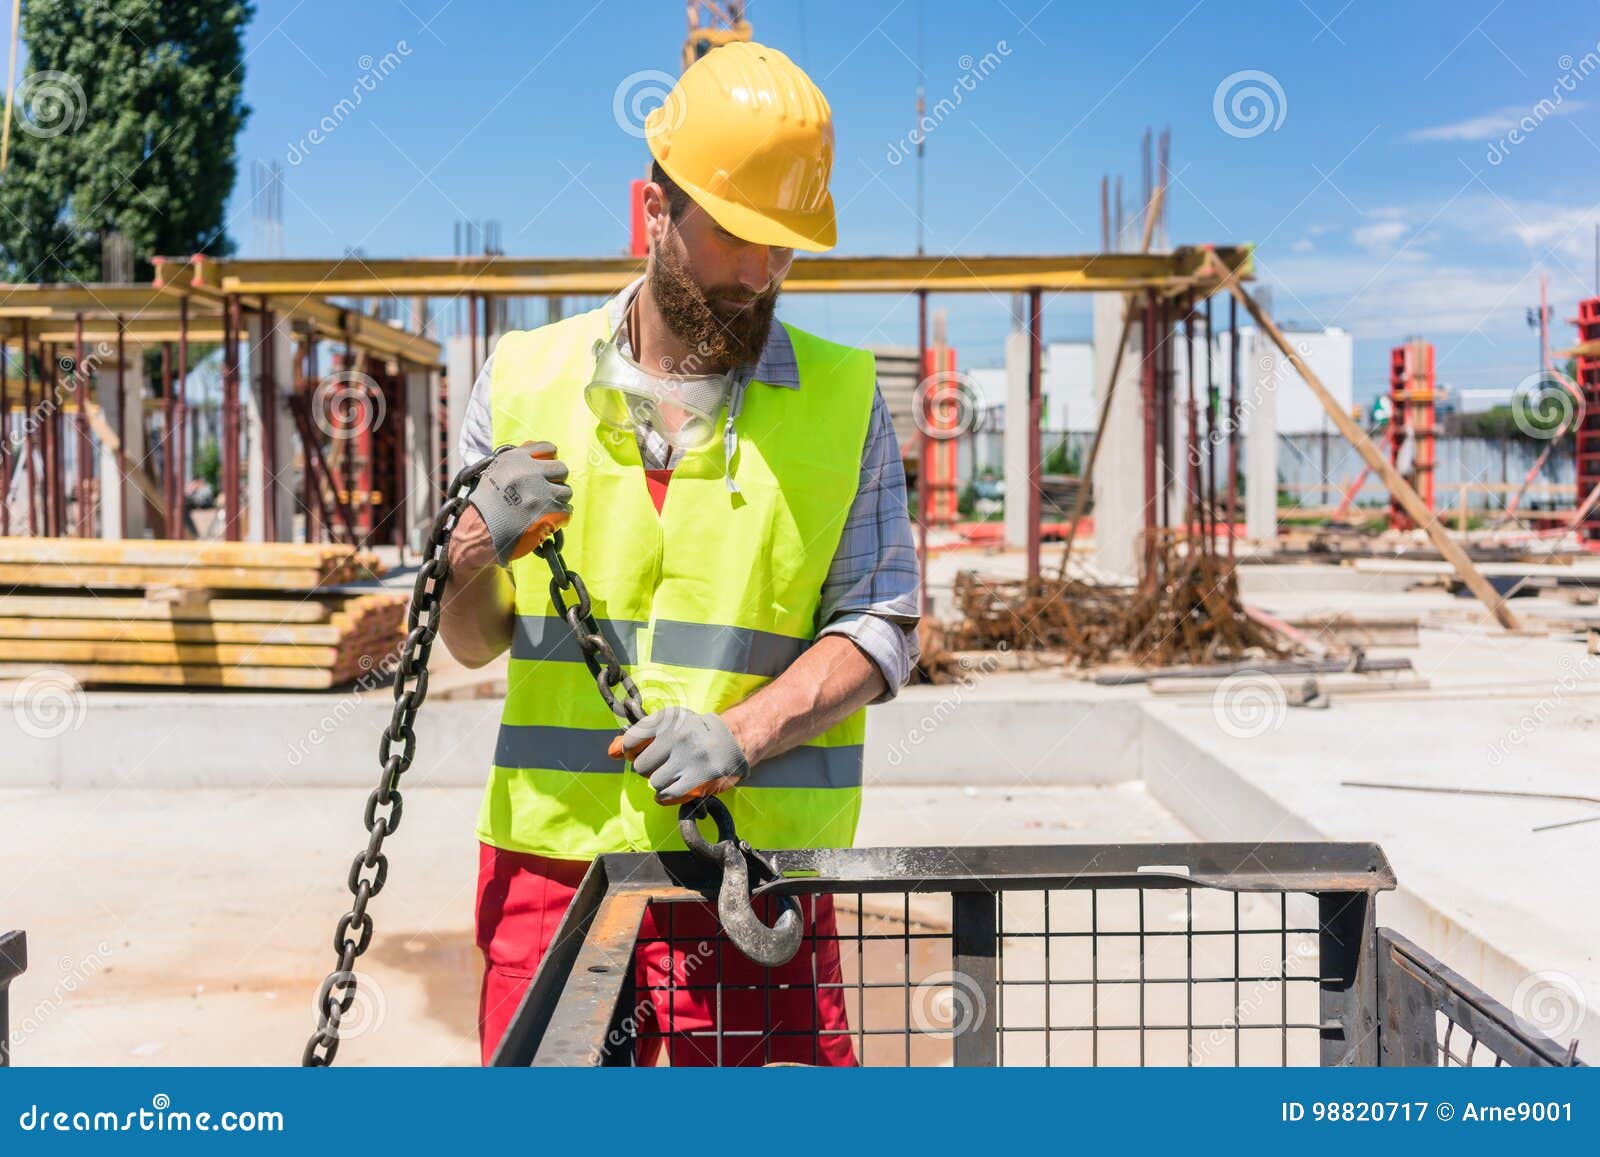 reliable worker checking the safety latch of a hook before lifti